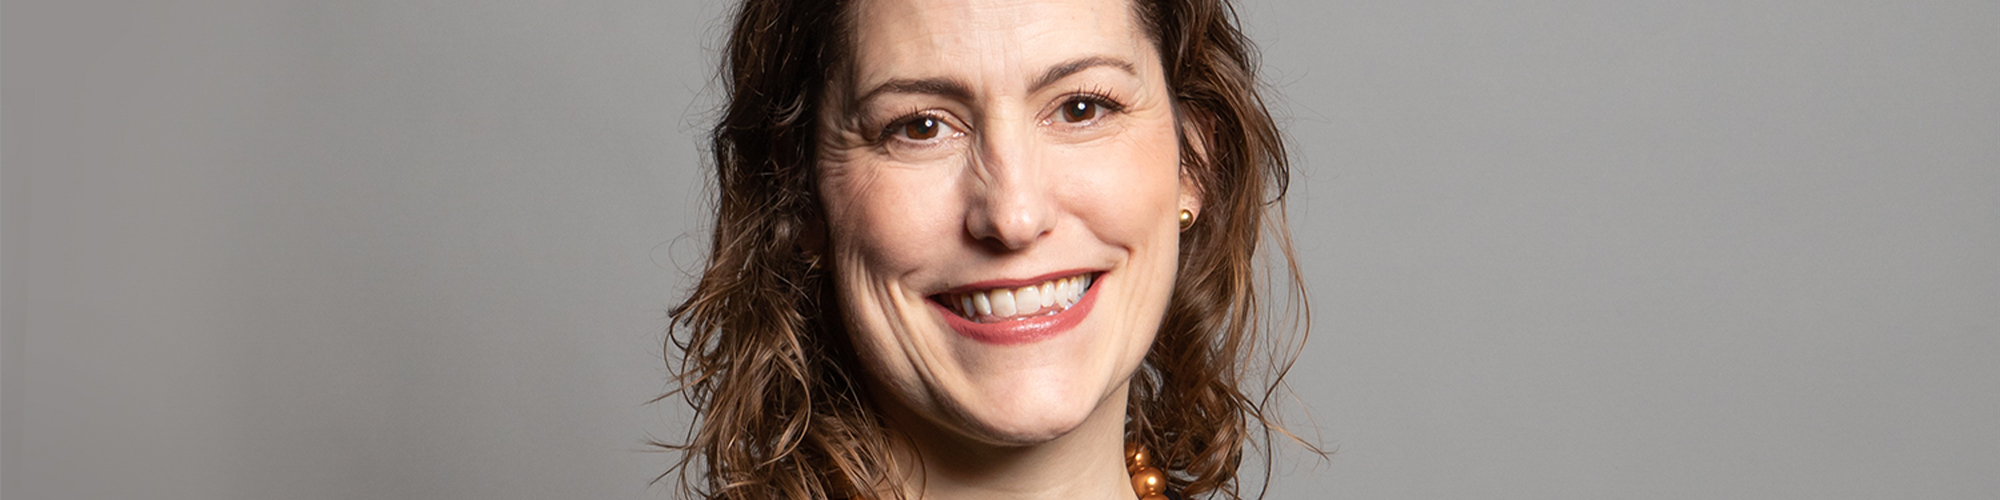 Victoria Atkins MP: Stopping the rise in domestic abuse